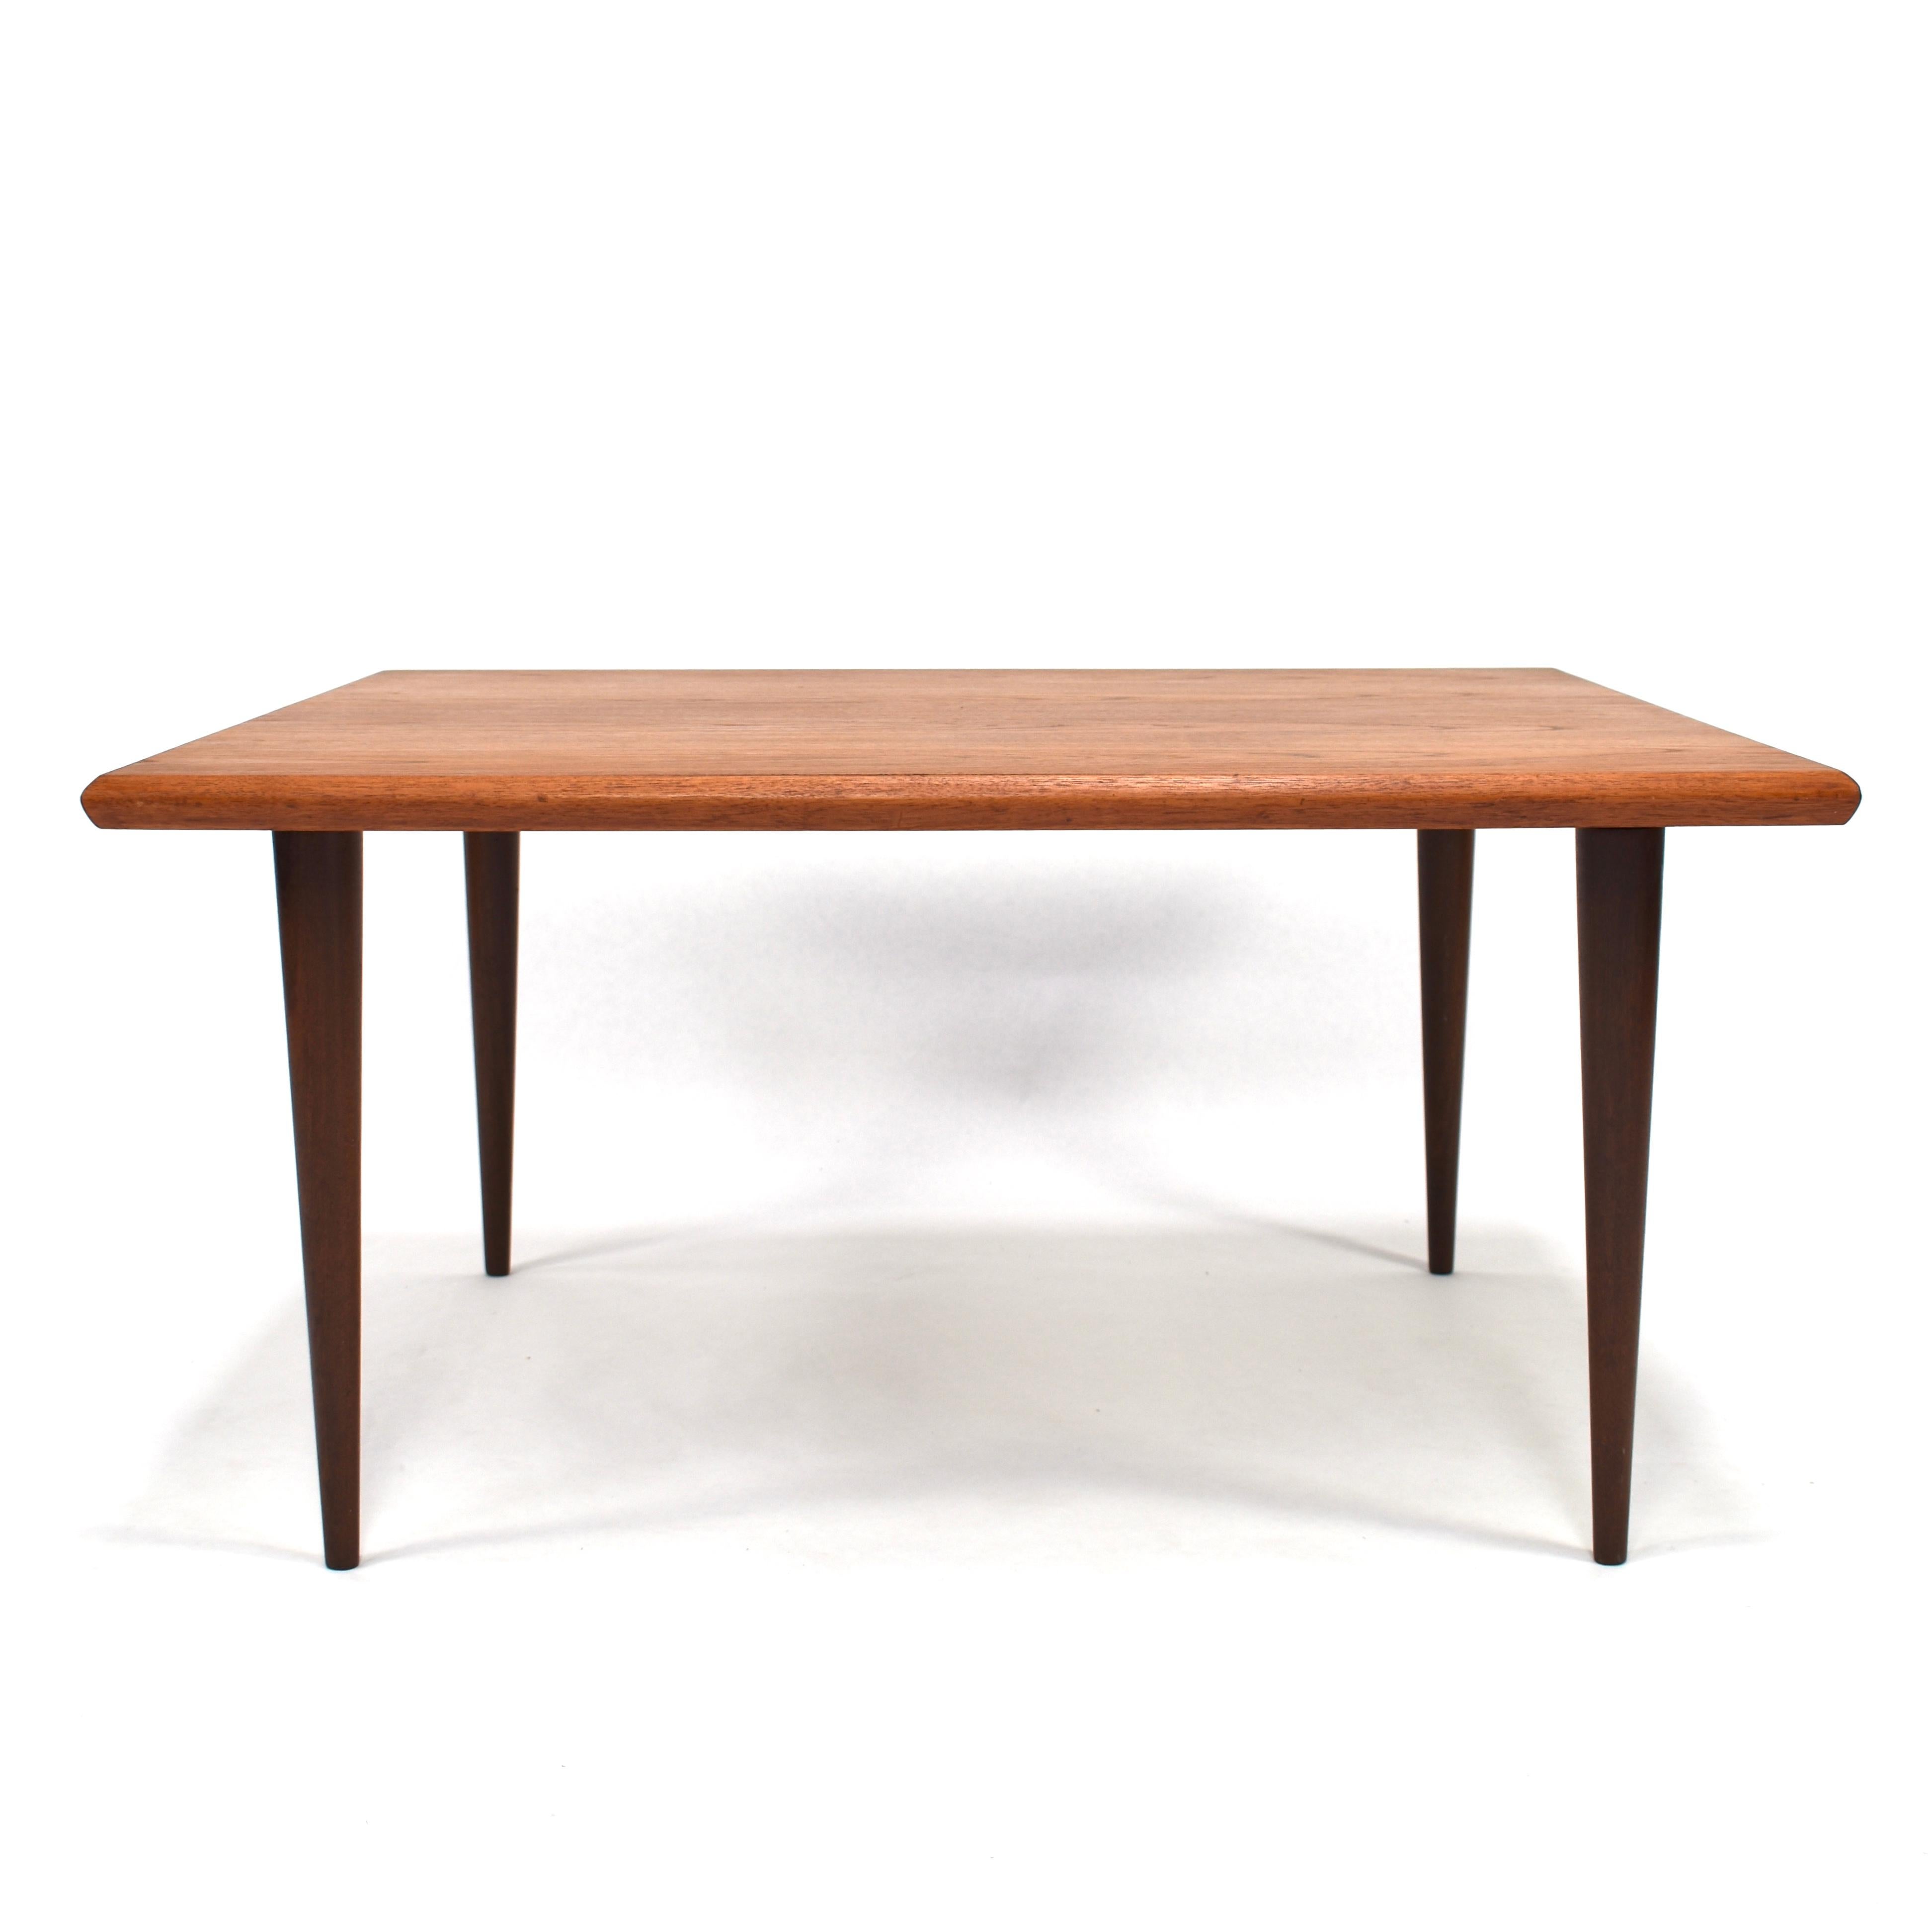 Danish square coffee table in Teak with beautiful solid teak tapered legs and solid teak edges. The legs can be screwed of.

Designer: Unknown

Manufacturer: Unknown

Country: Denmark

Model: coffee table

Material: Teak. Veneer top with